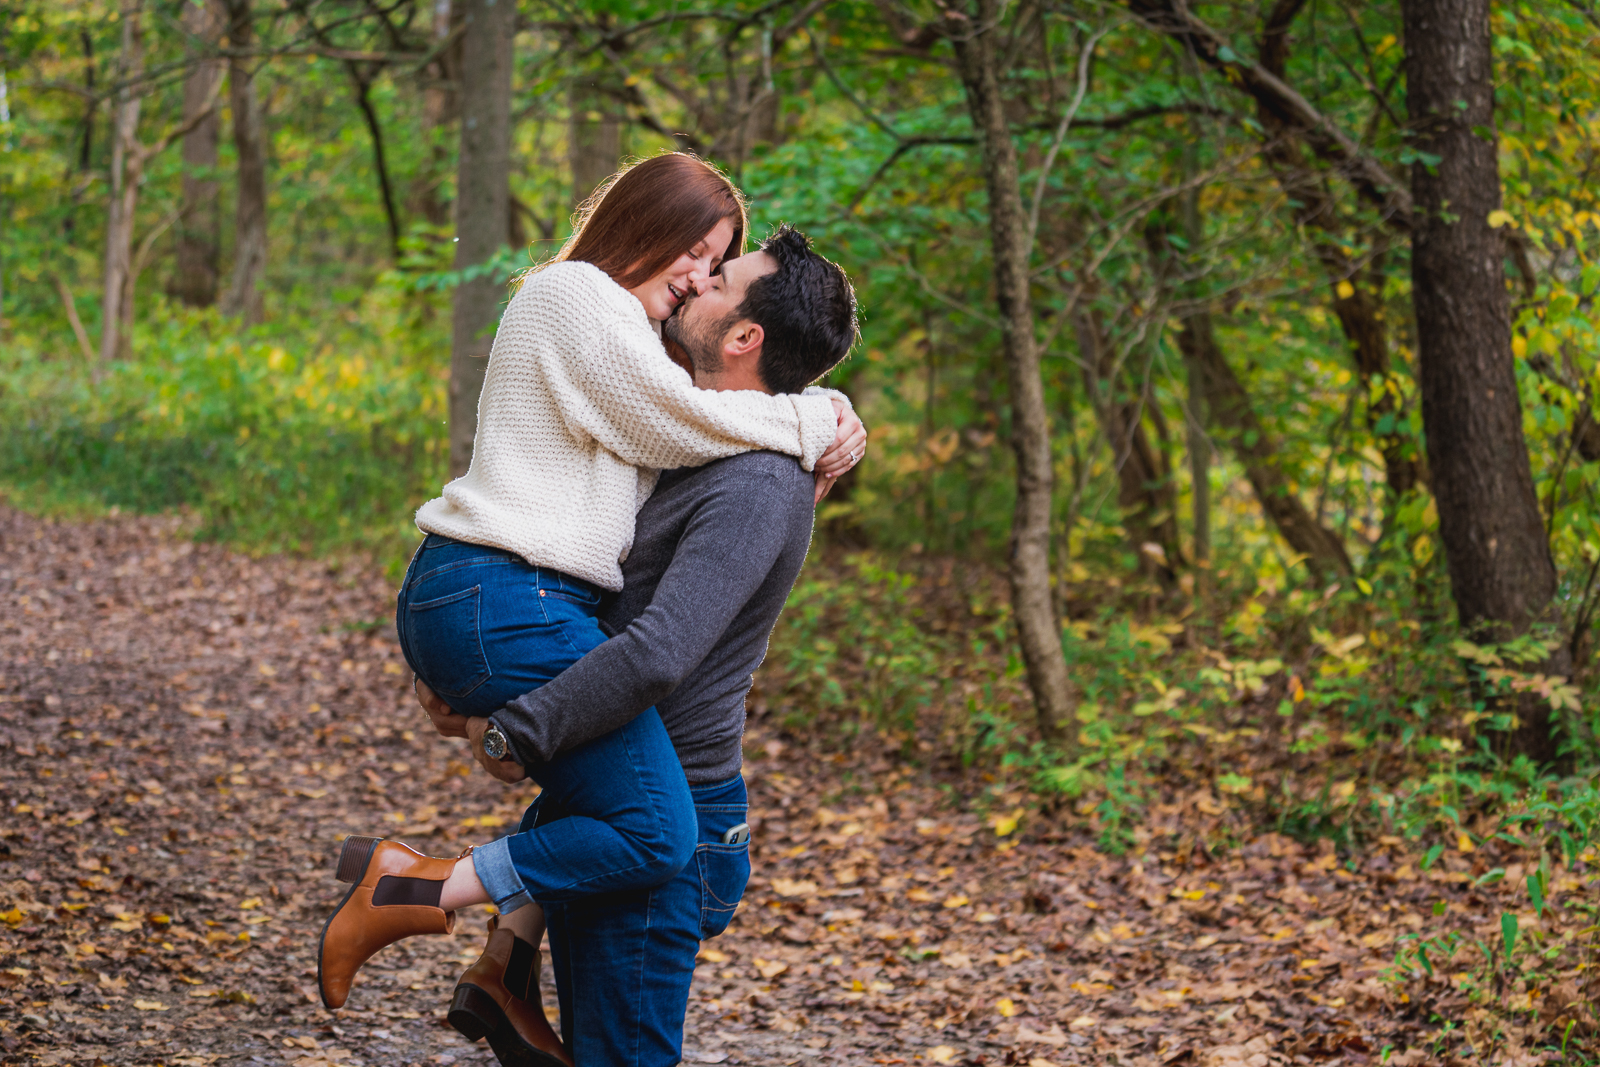 Man and woman fiancee engagement photo, couple portrait, fall leaves, fall colors, cute, kiss, nature, forest, trees, outdoor fall engagement photo session at Tinkers Creek, Bedford Reservation, Cleveland Metroparks